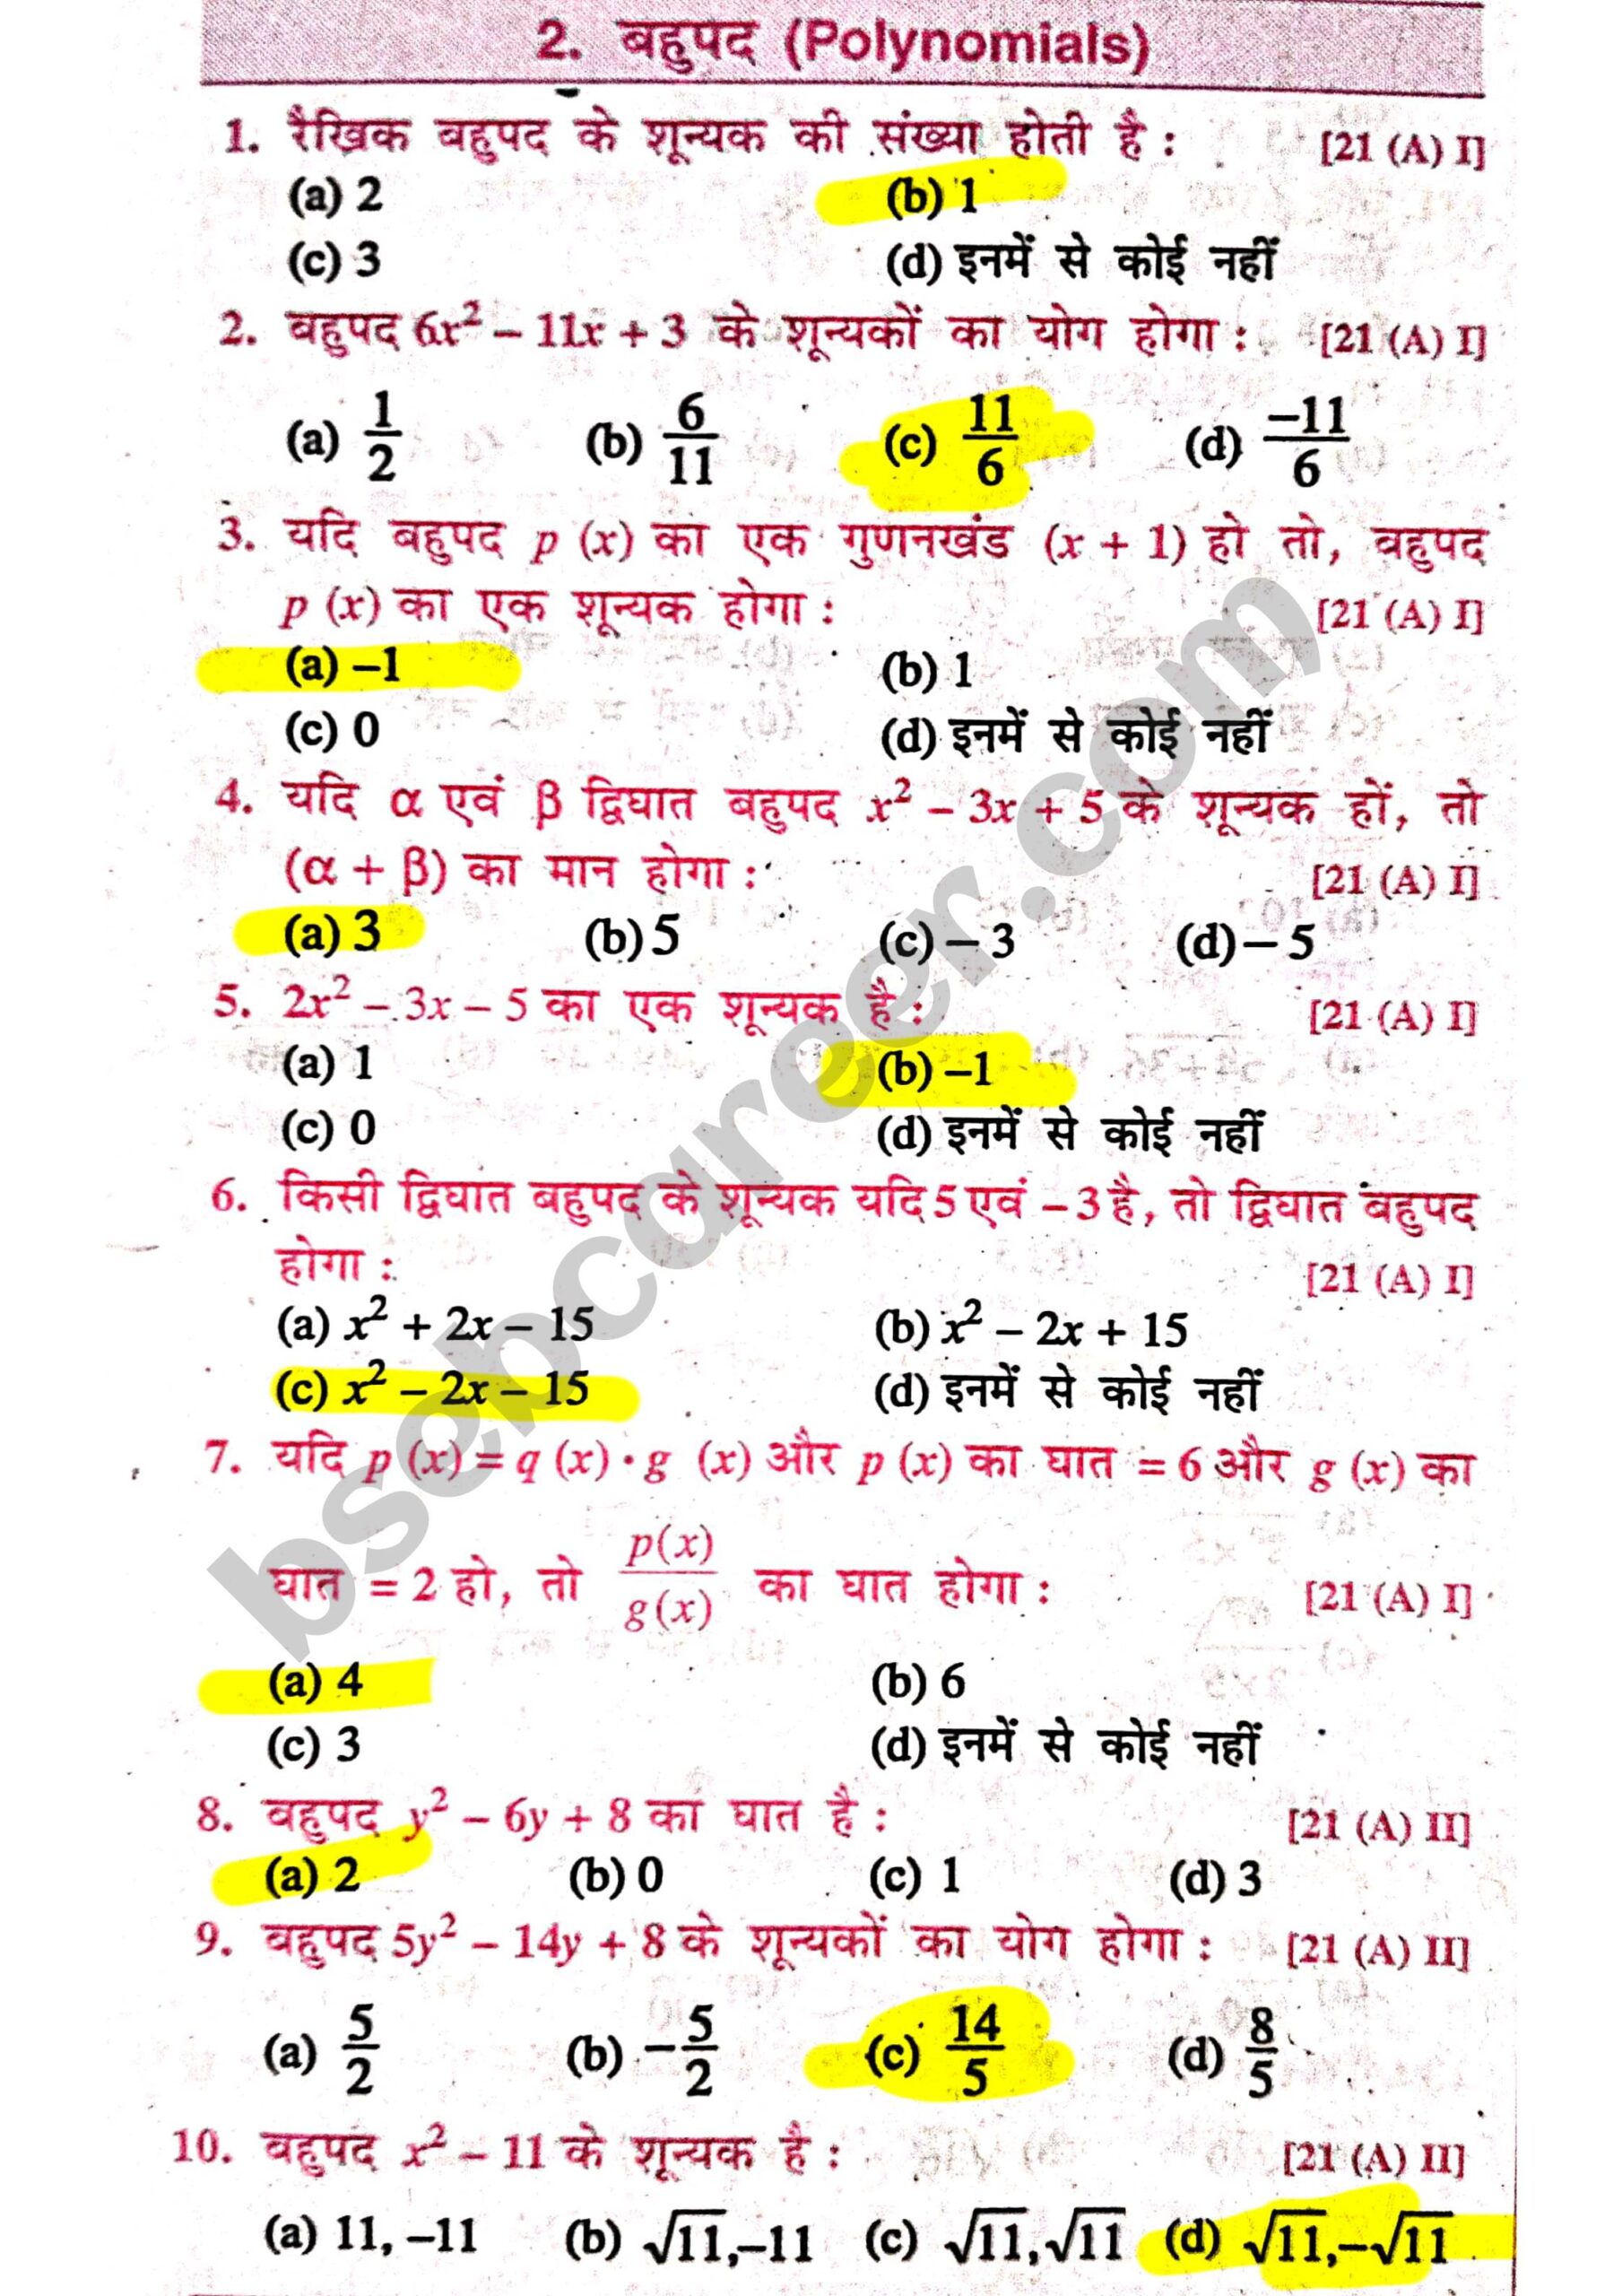 Class 10th Maths Chapter 2 MCQ In Hindi